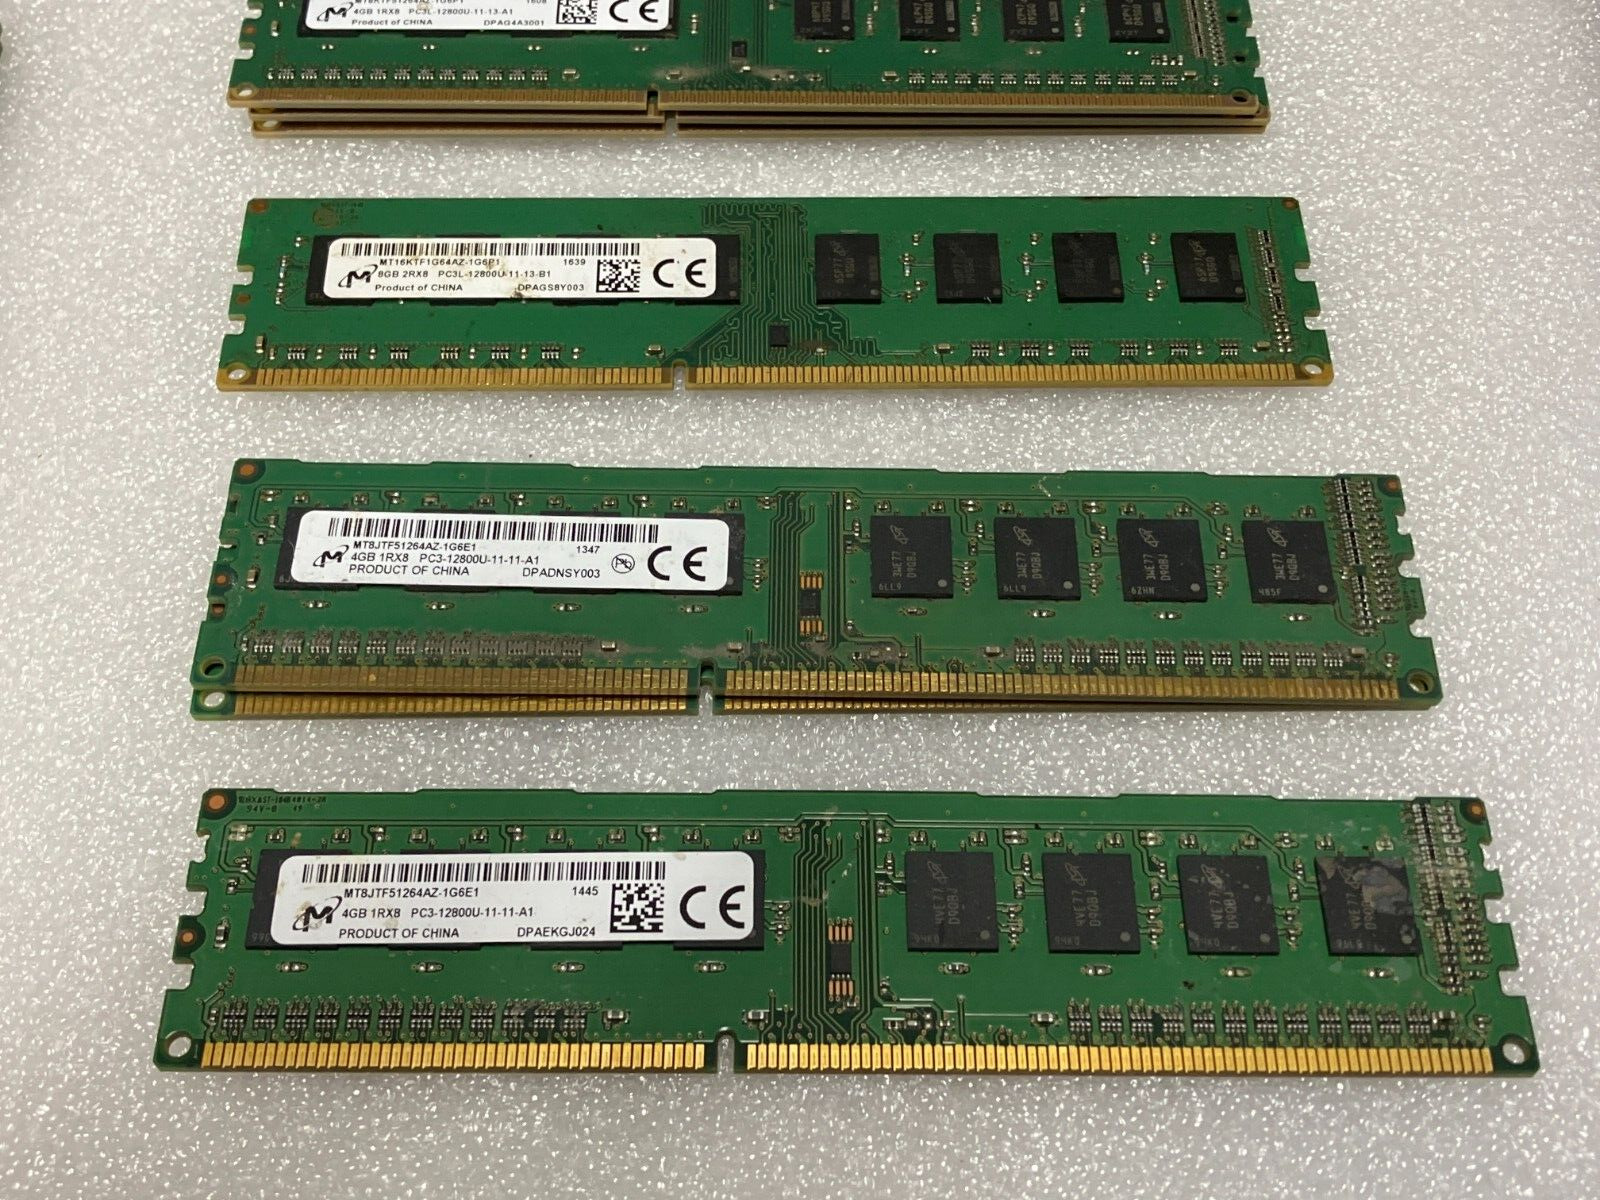 LOT OF 31 TOTAL MICRON RAM / MEMORY  10 DIFFERENT MODEL NUMBERS SEE PHOTOS 